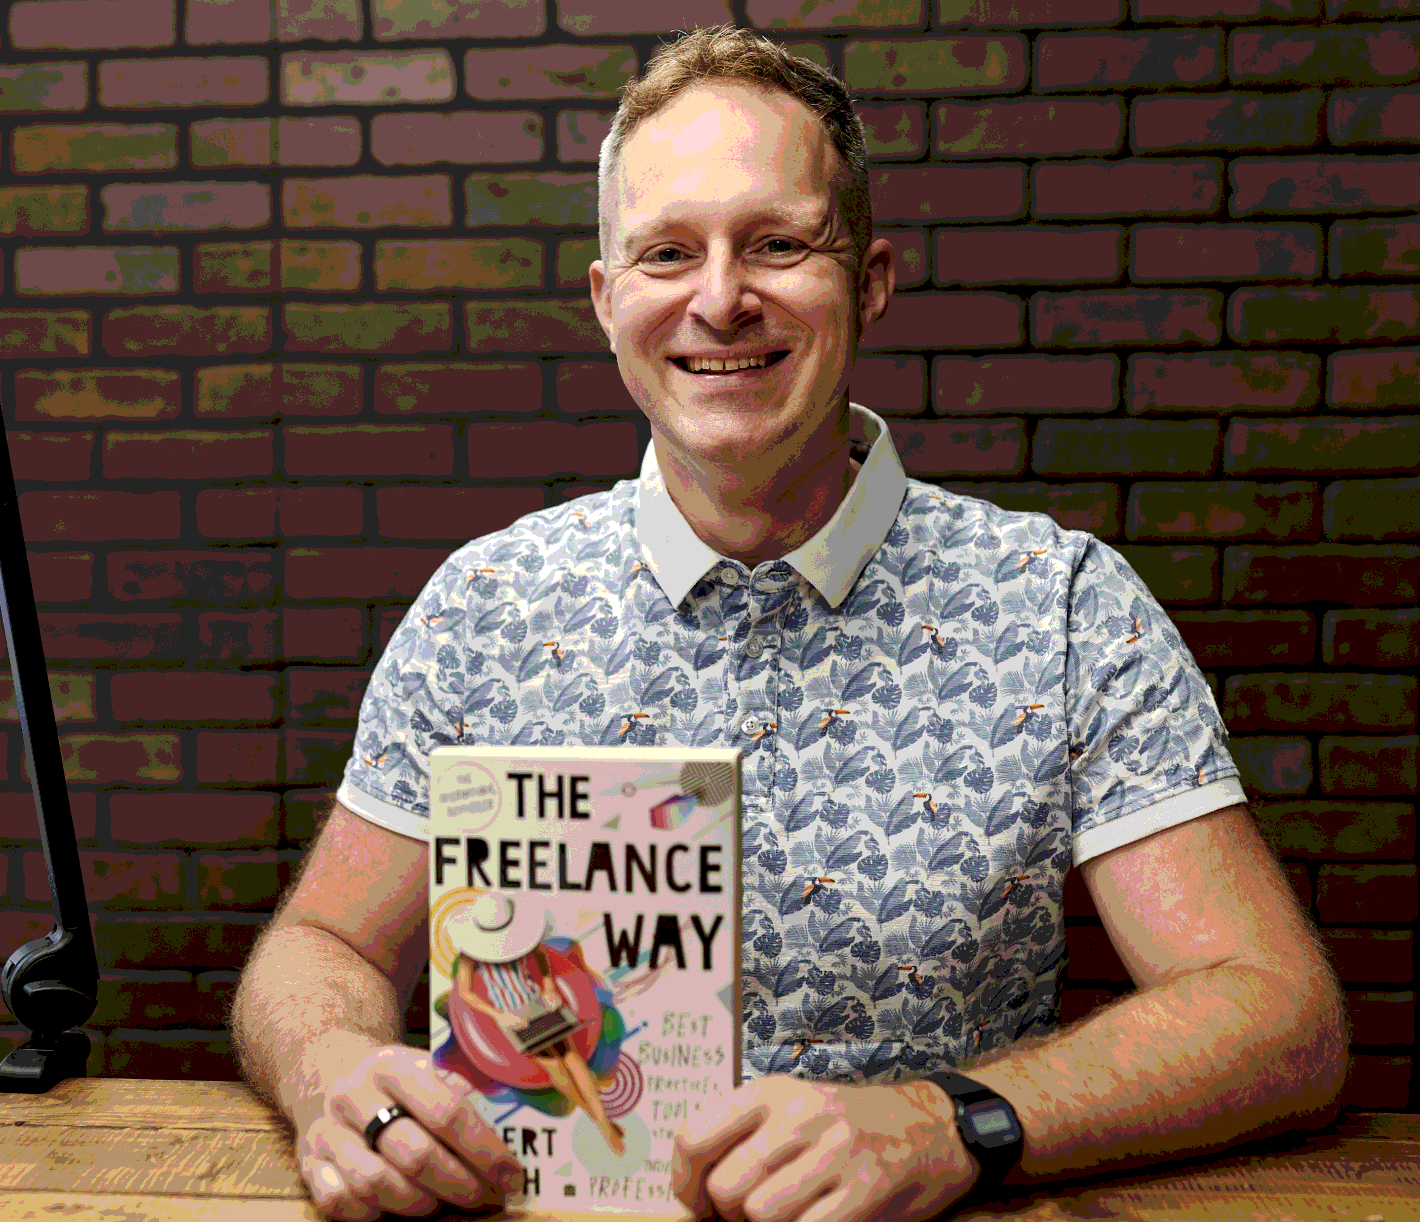 Robert Vlach: How to Start Freelancing, Freelance Pricing, The Freelance Way Book and More